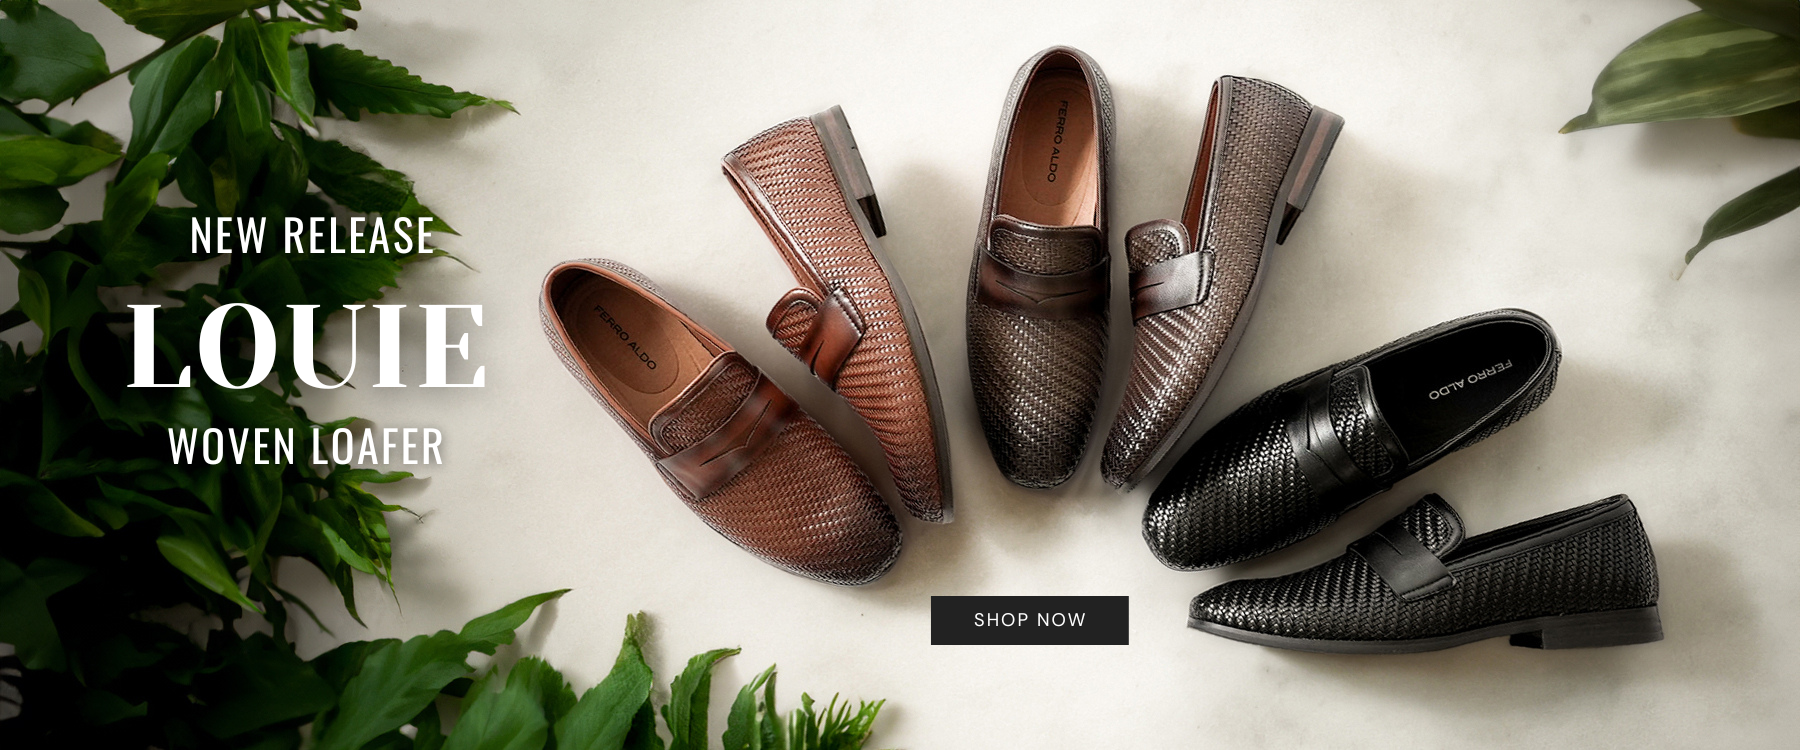 New Drops - Louie Loafer | Trendy Woven Loafer For All Occasions  | Ferro Aldo by Conal Footwear